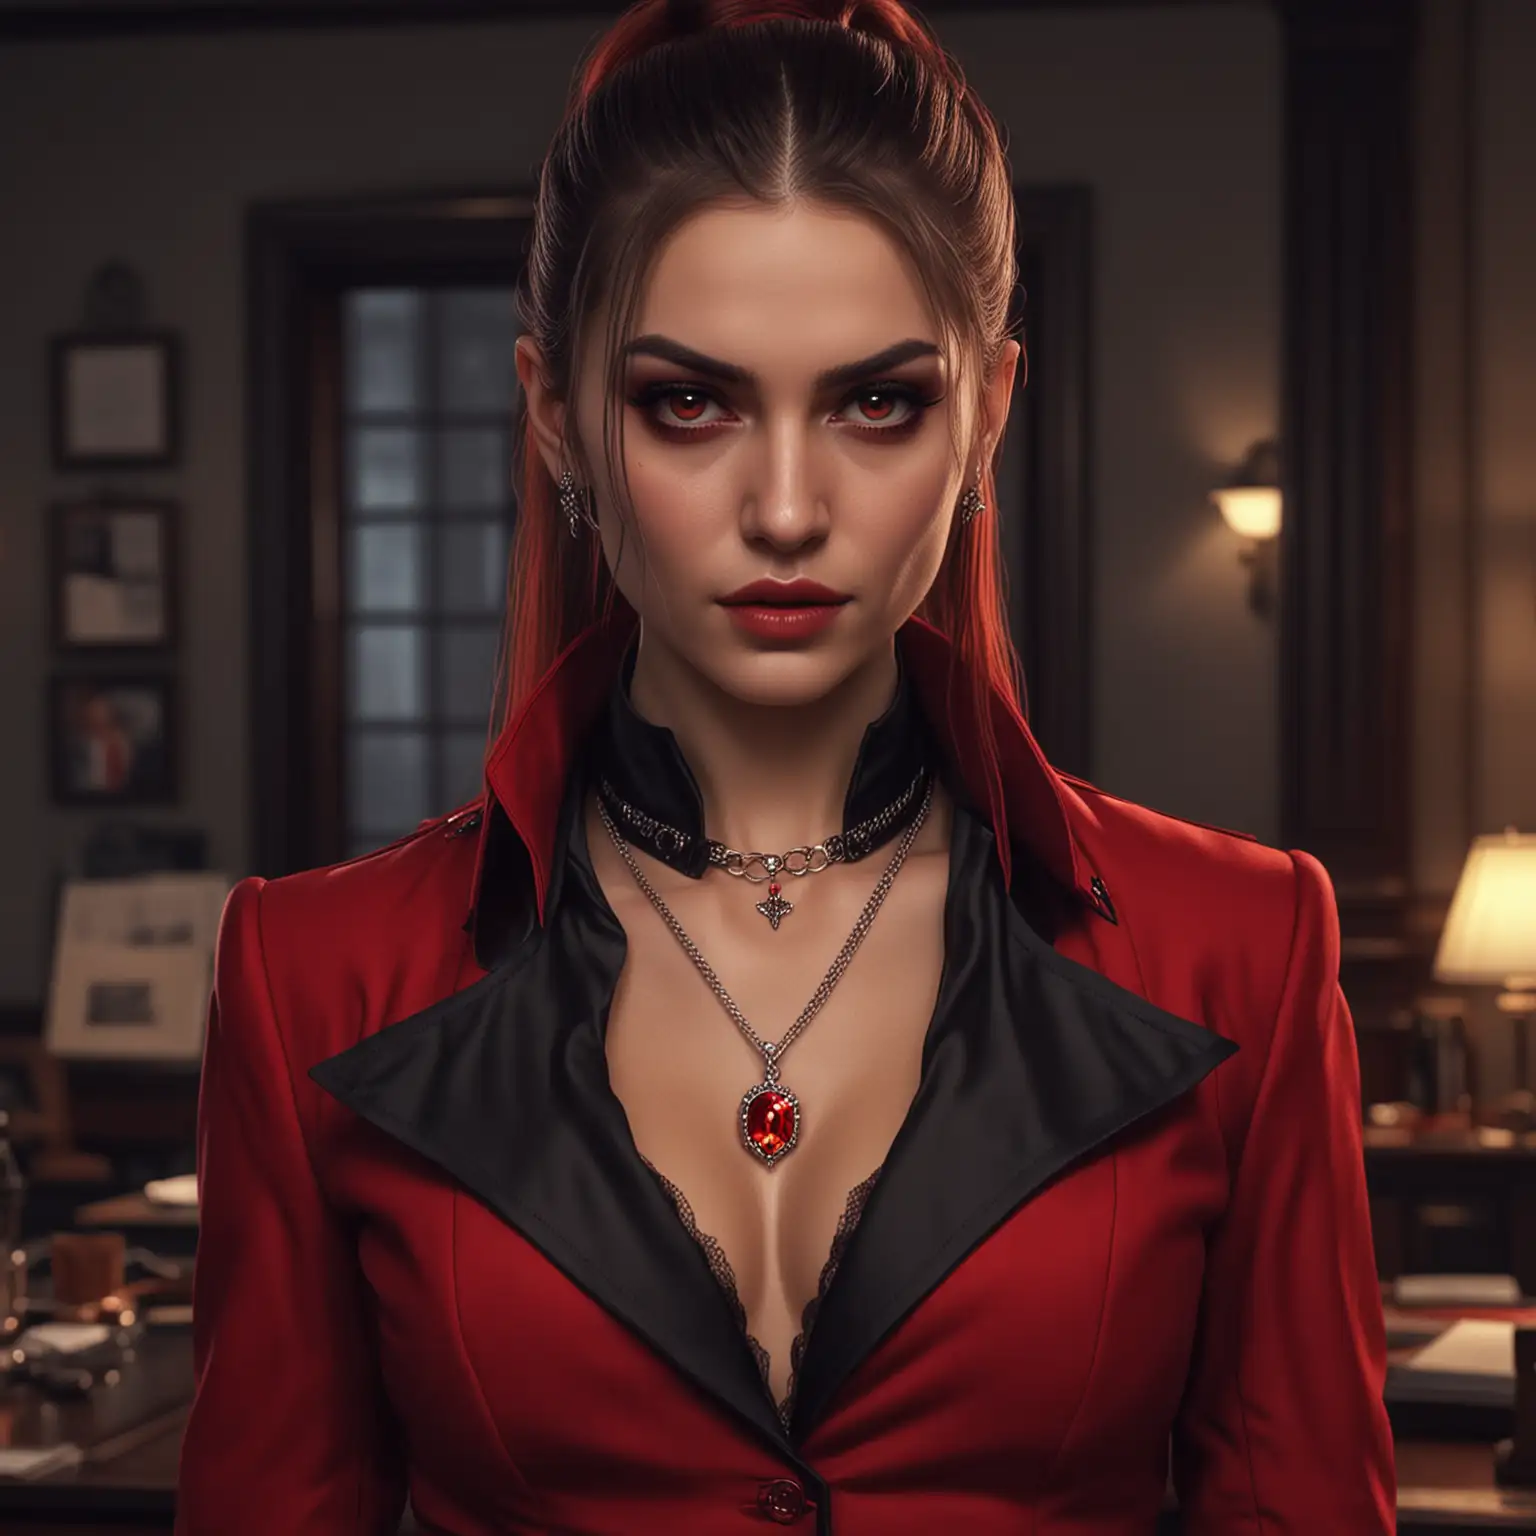 A female Toreador vampire, red glowing eyes, ponytail, wearing a fitting deep red suit, fitting red trousers, necklace with a red pendant, inside a mafia boss' office, at night, realistic